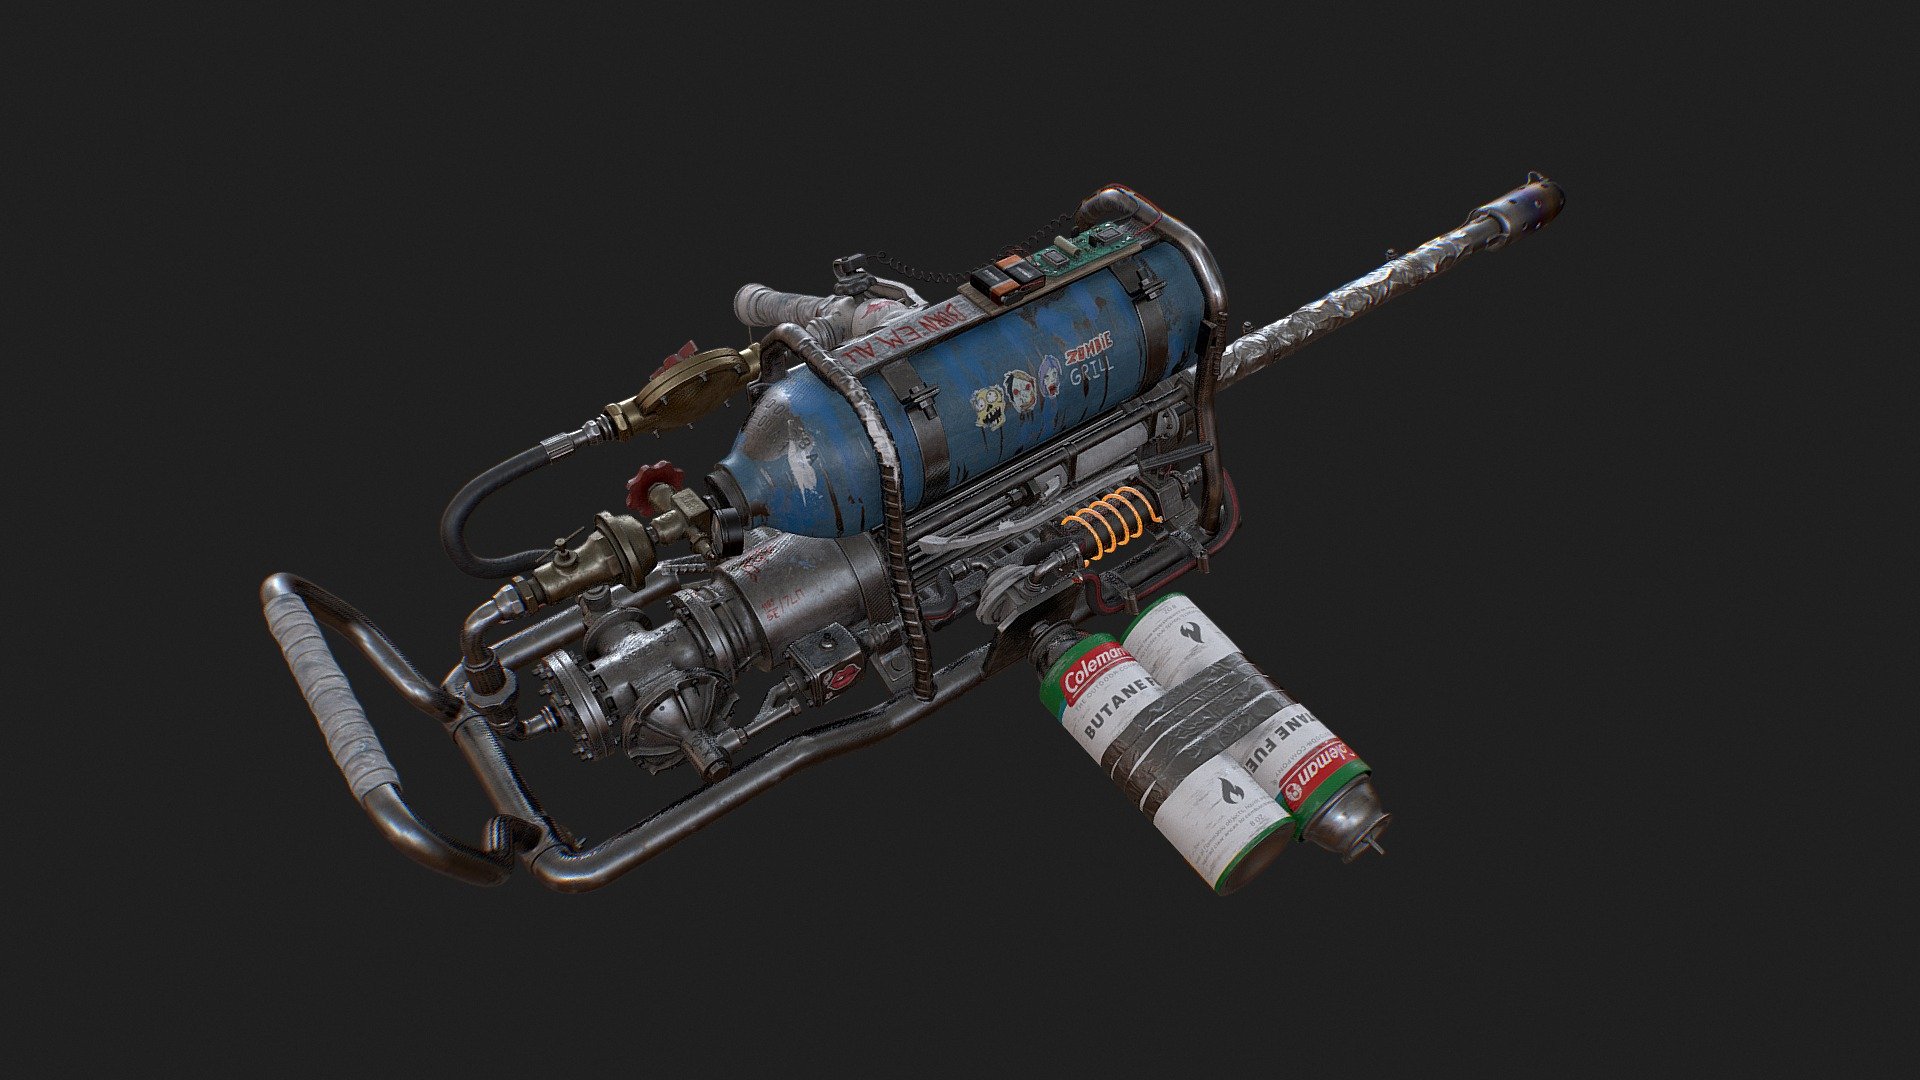 Here's a flame thrower I've been working on lately. I tried to make it from an original concept and have functionality in mind in the design process. used Zbrush for modeling, retopology it in Maya and painter for texturing.

Check here for more images: https://www.artstation.com/artwork/Qn2YPB - Flame Thrower - Buy Royalty Free 3D model by emran.bayati 3d model